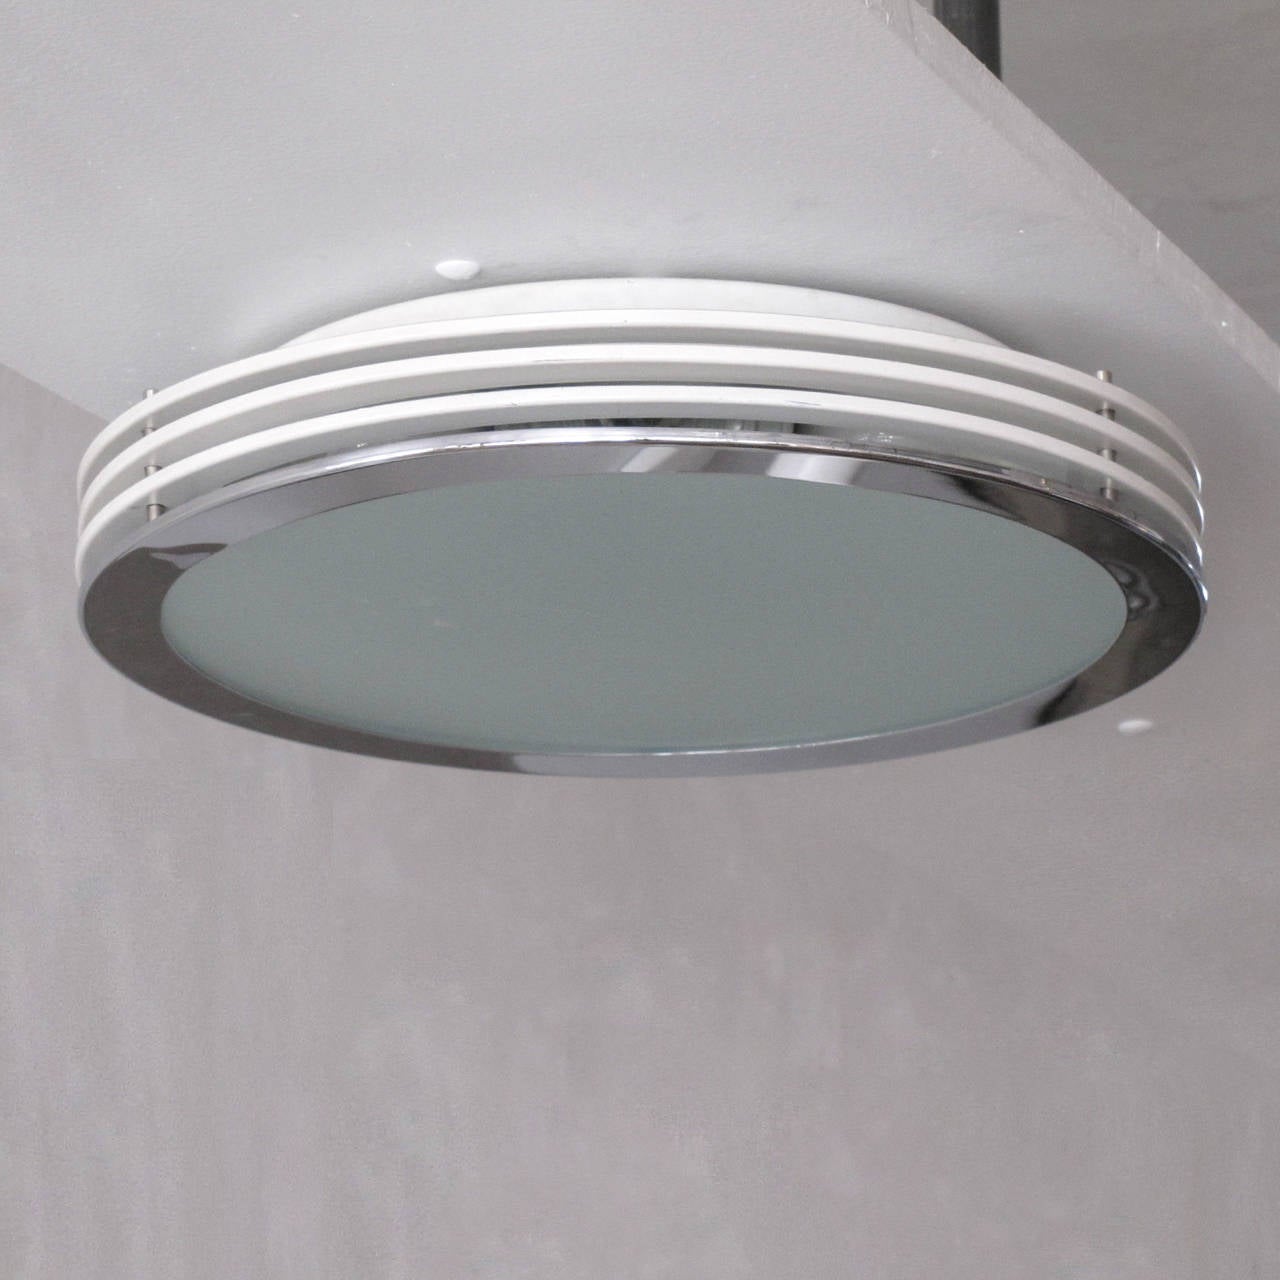 Elegant, frosted glass ceiling mounted light by Doria Leuchten Germany with chrome-plated and white enameled layered rings.